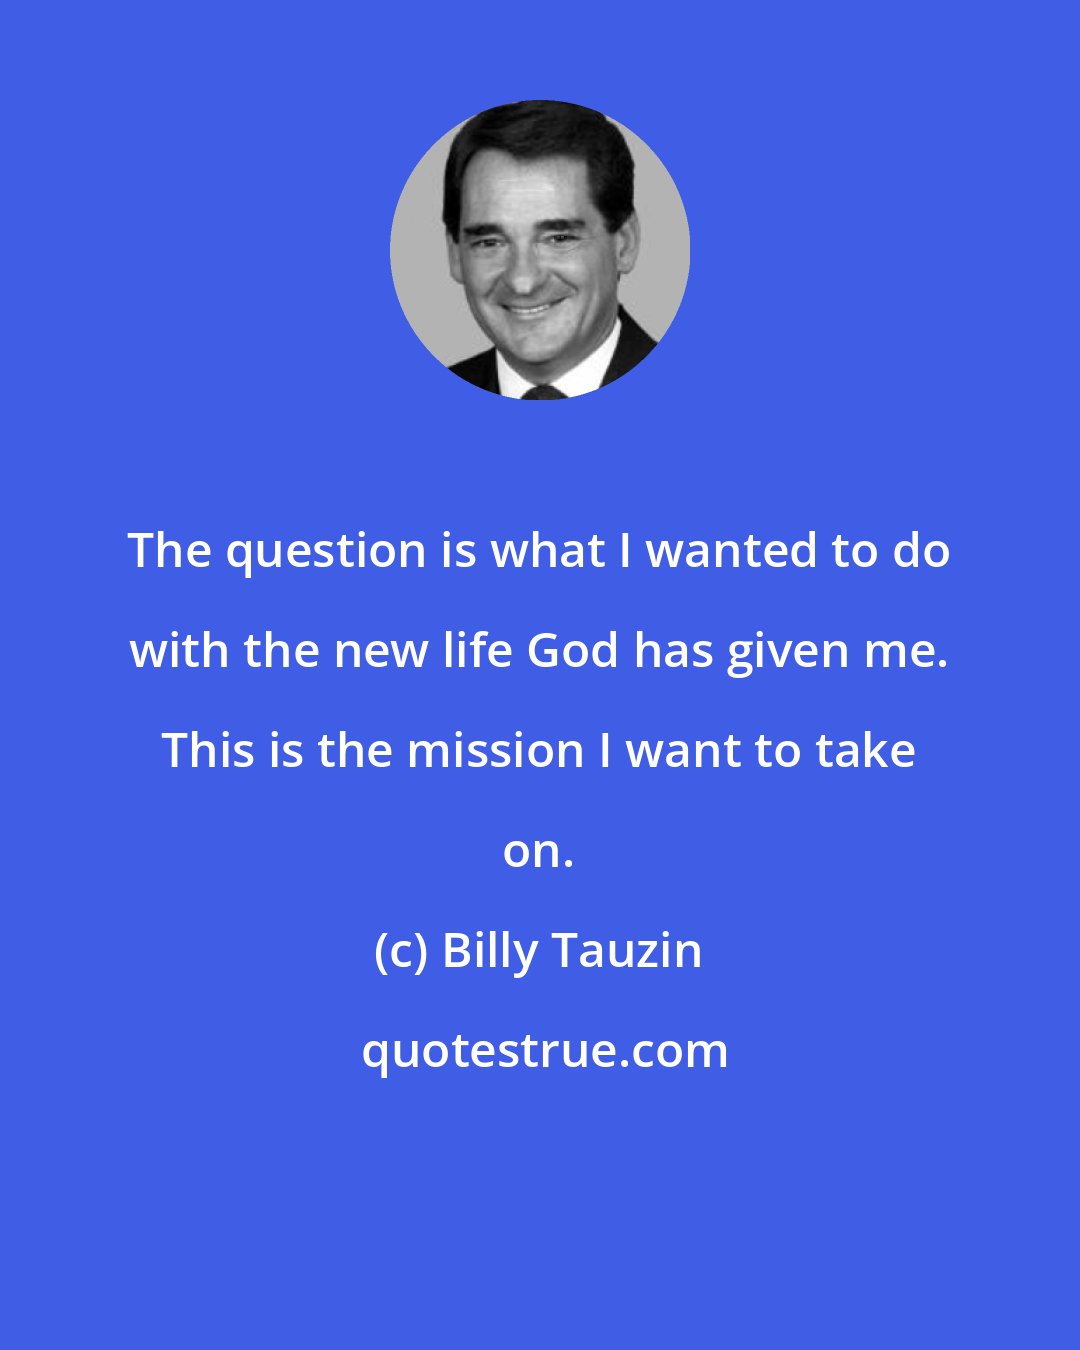 Billy Tauzin: The question is what I wanted to do with the new life God has given me. This is the mission I want to take on.